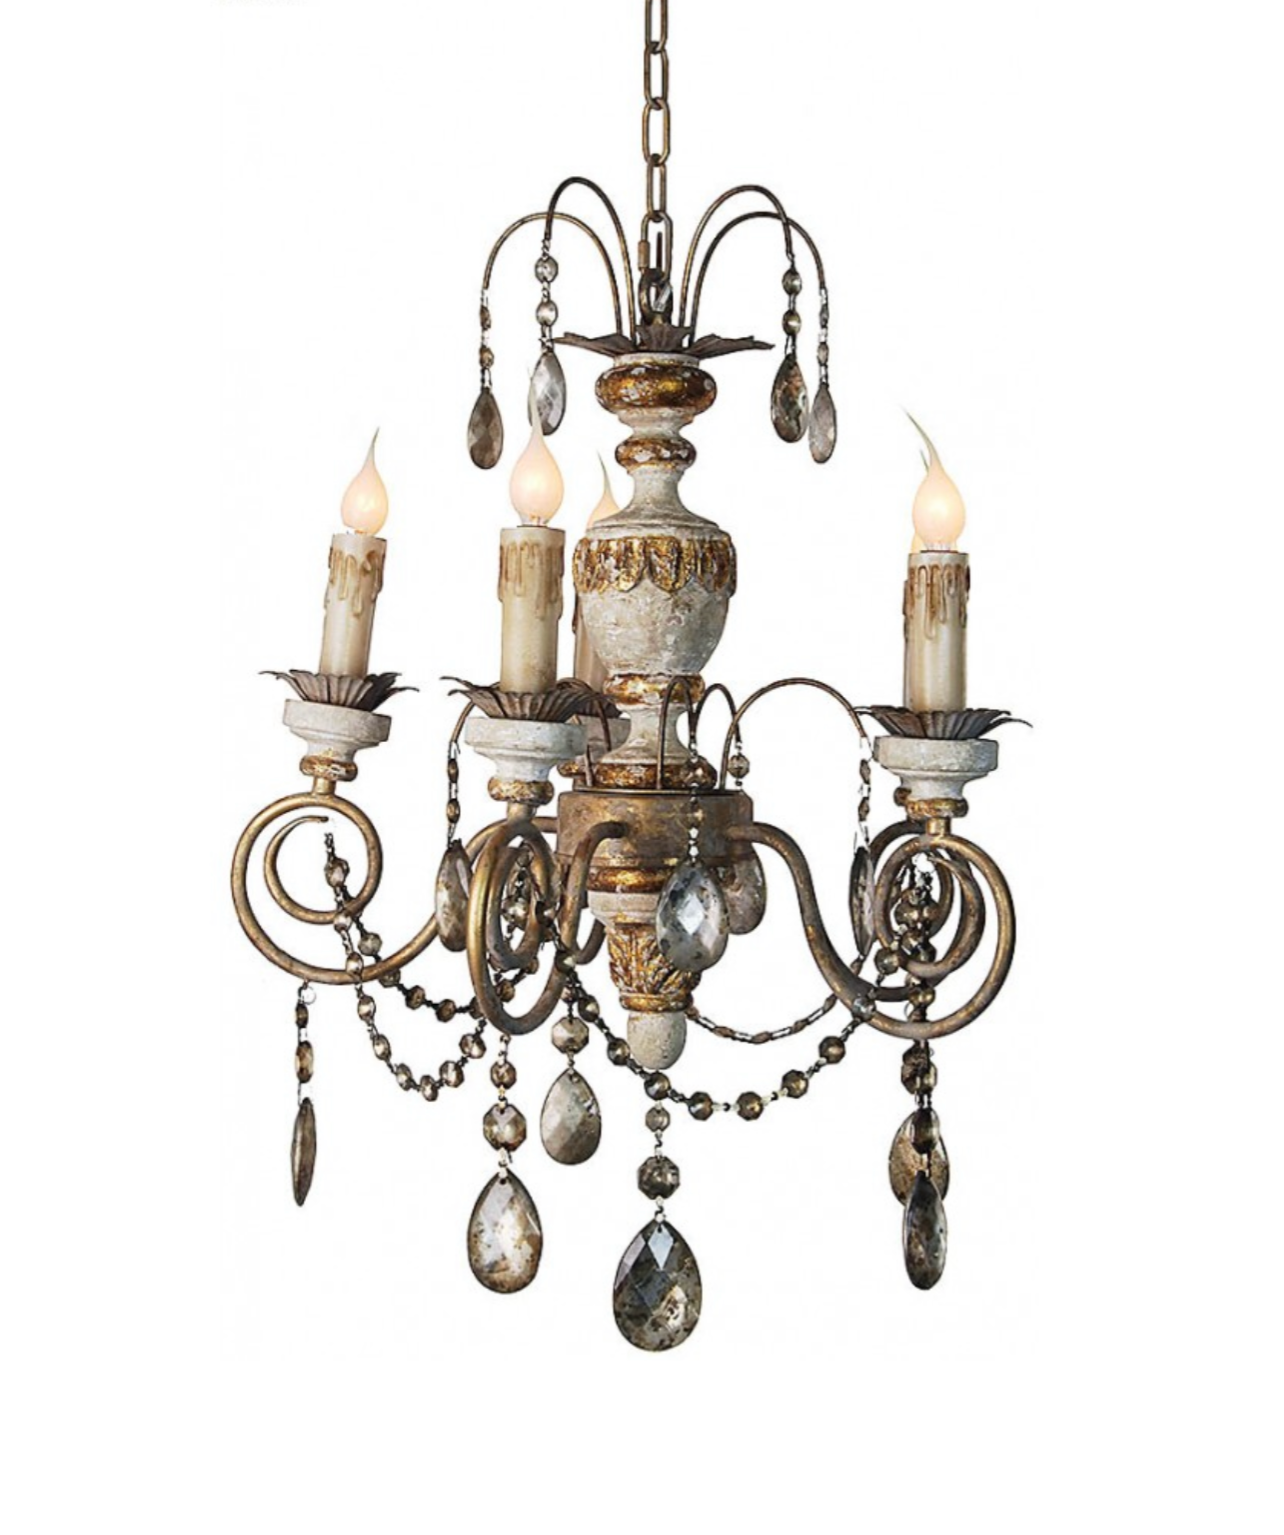 Carved Wood Chandelier with Distressed finish and Gold Accents